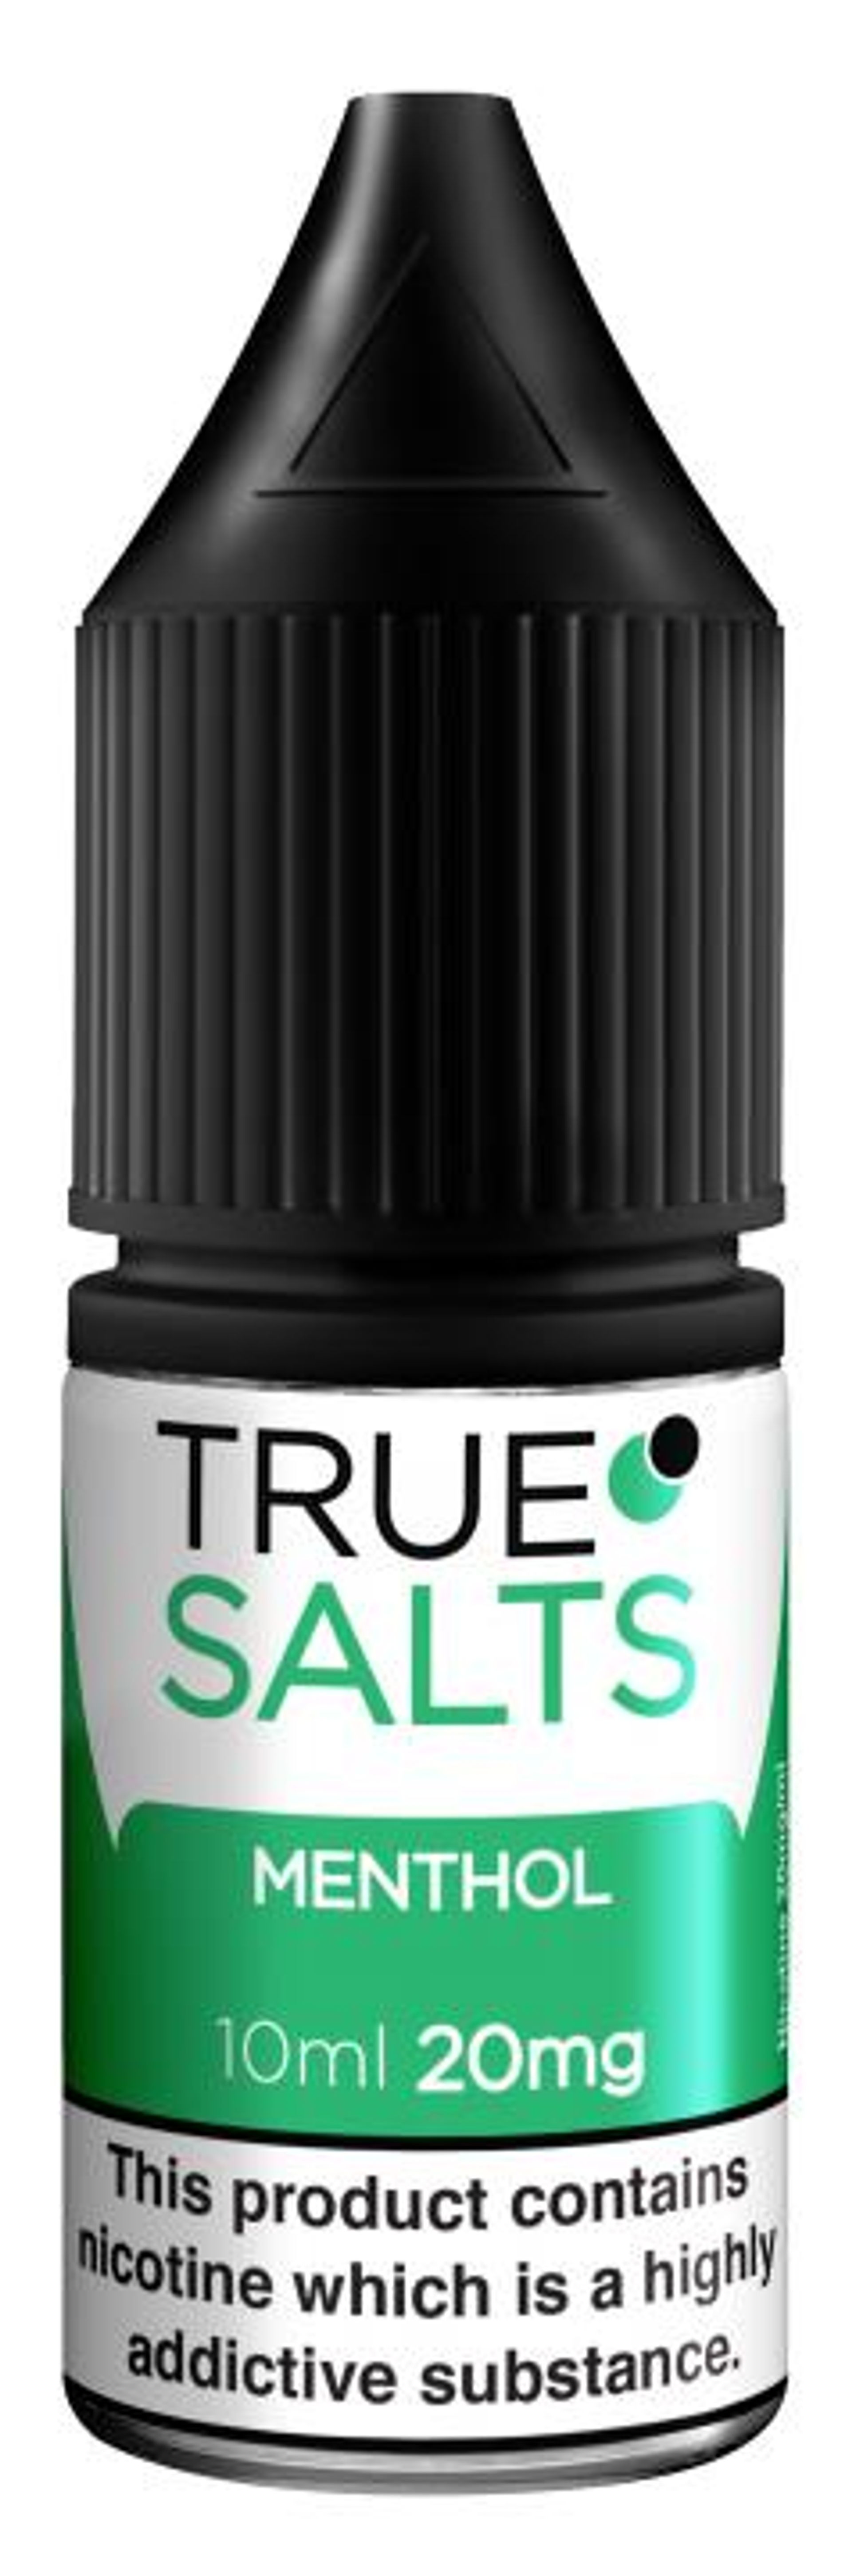 Image of Menthol by True Salts